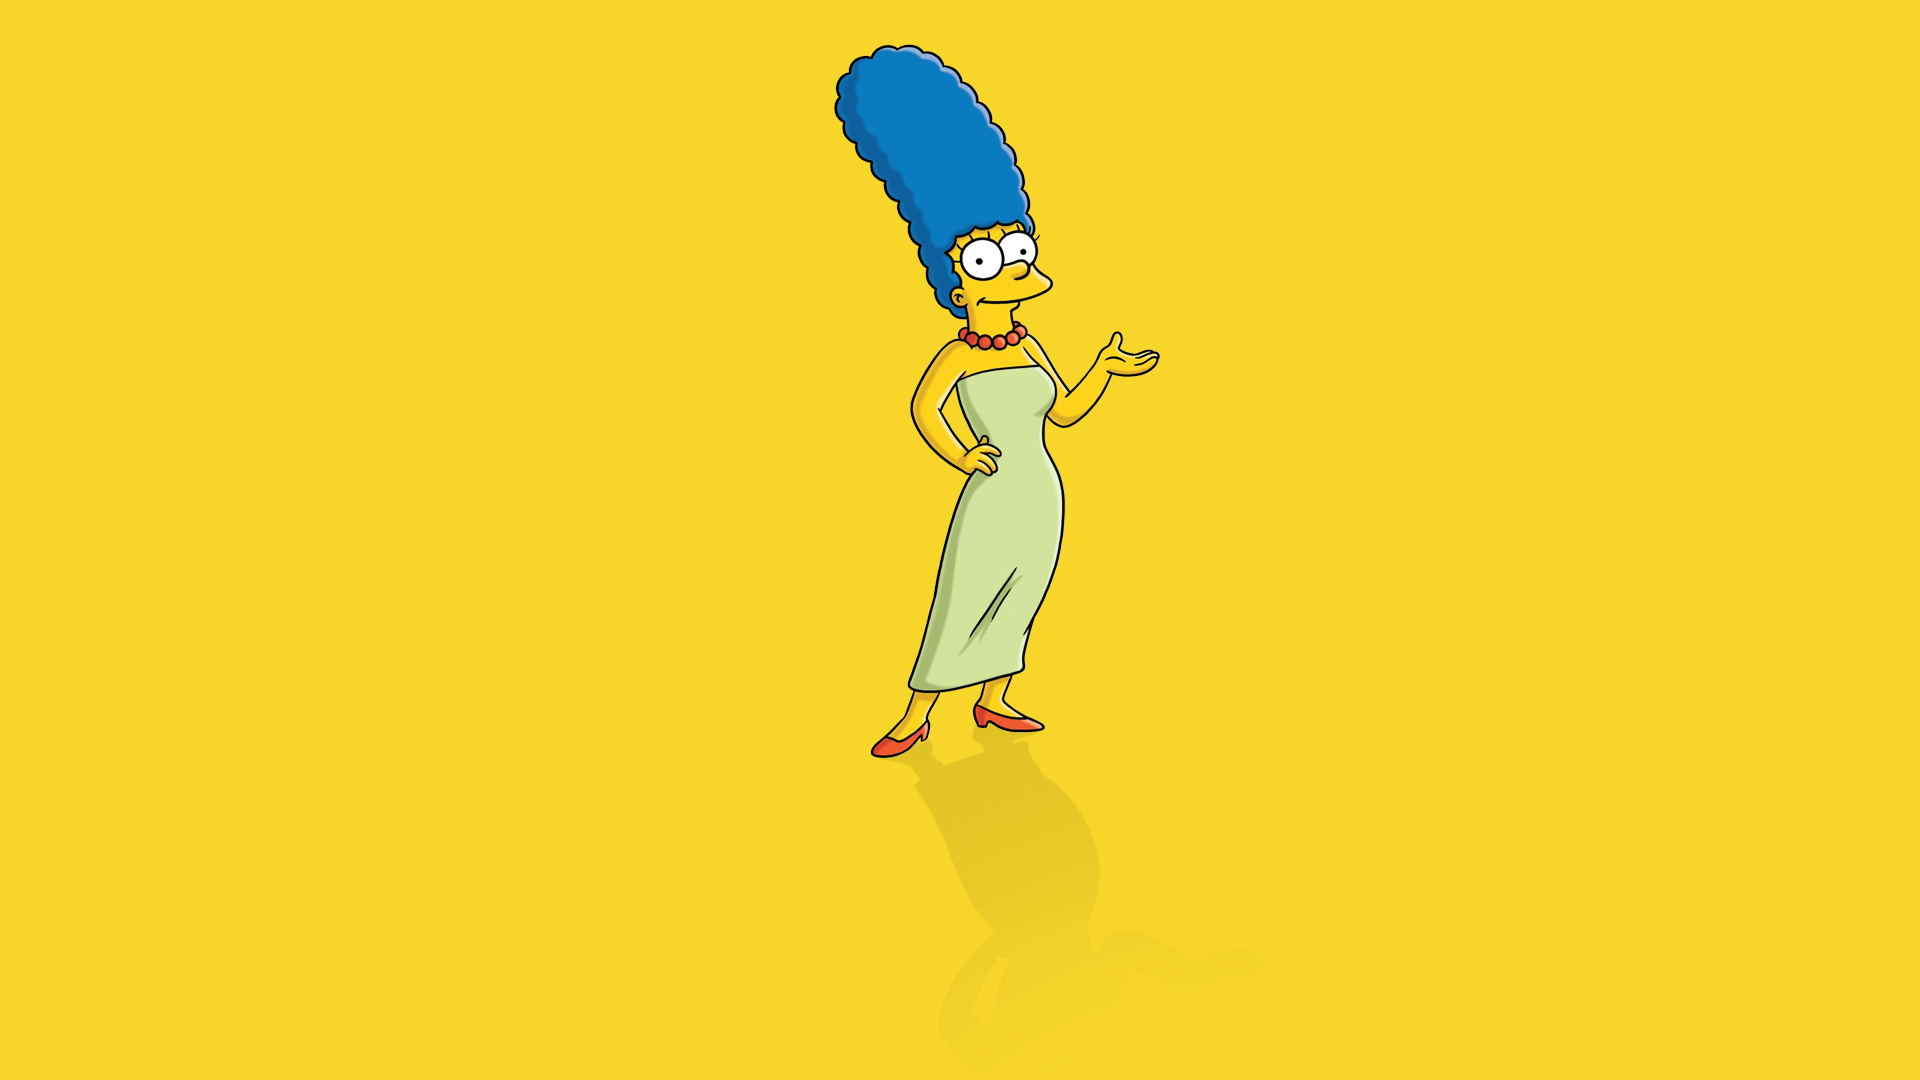 Marge Simpson - Wallpaper, High Definition, High Quality, Widescreen